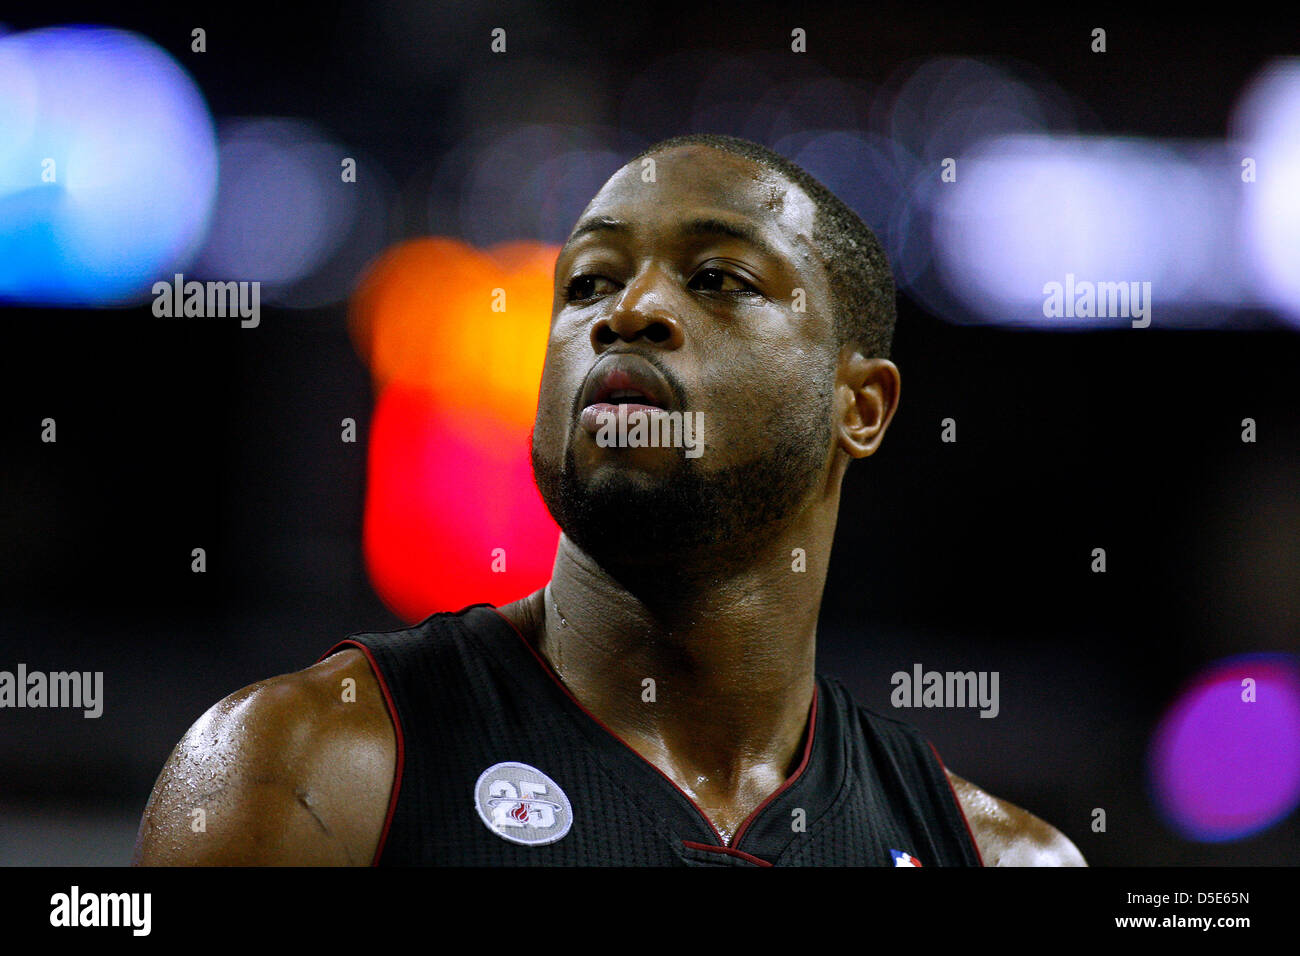 March 29, 2013 - New Orleans, Louisiana, United States of America - March 29, 2013: Miami Heat shooting guard Dwyane Wade (3) during the NBA basketball game between the New Orleans Hornets and the Miami Heat at the New Orleans Arena in New Orleans, LA. Stock Photo